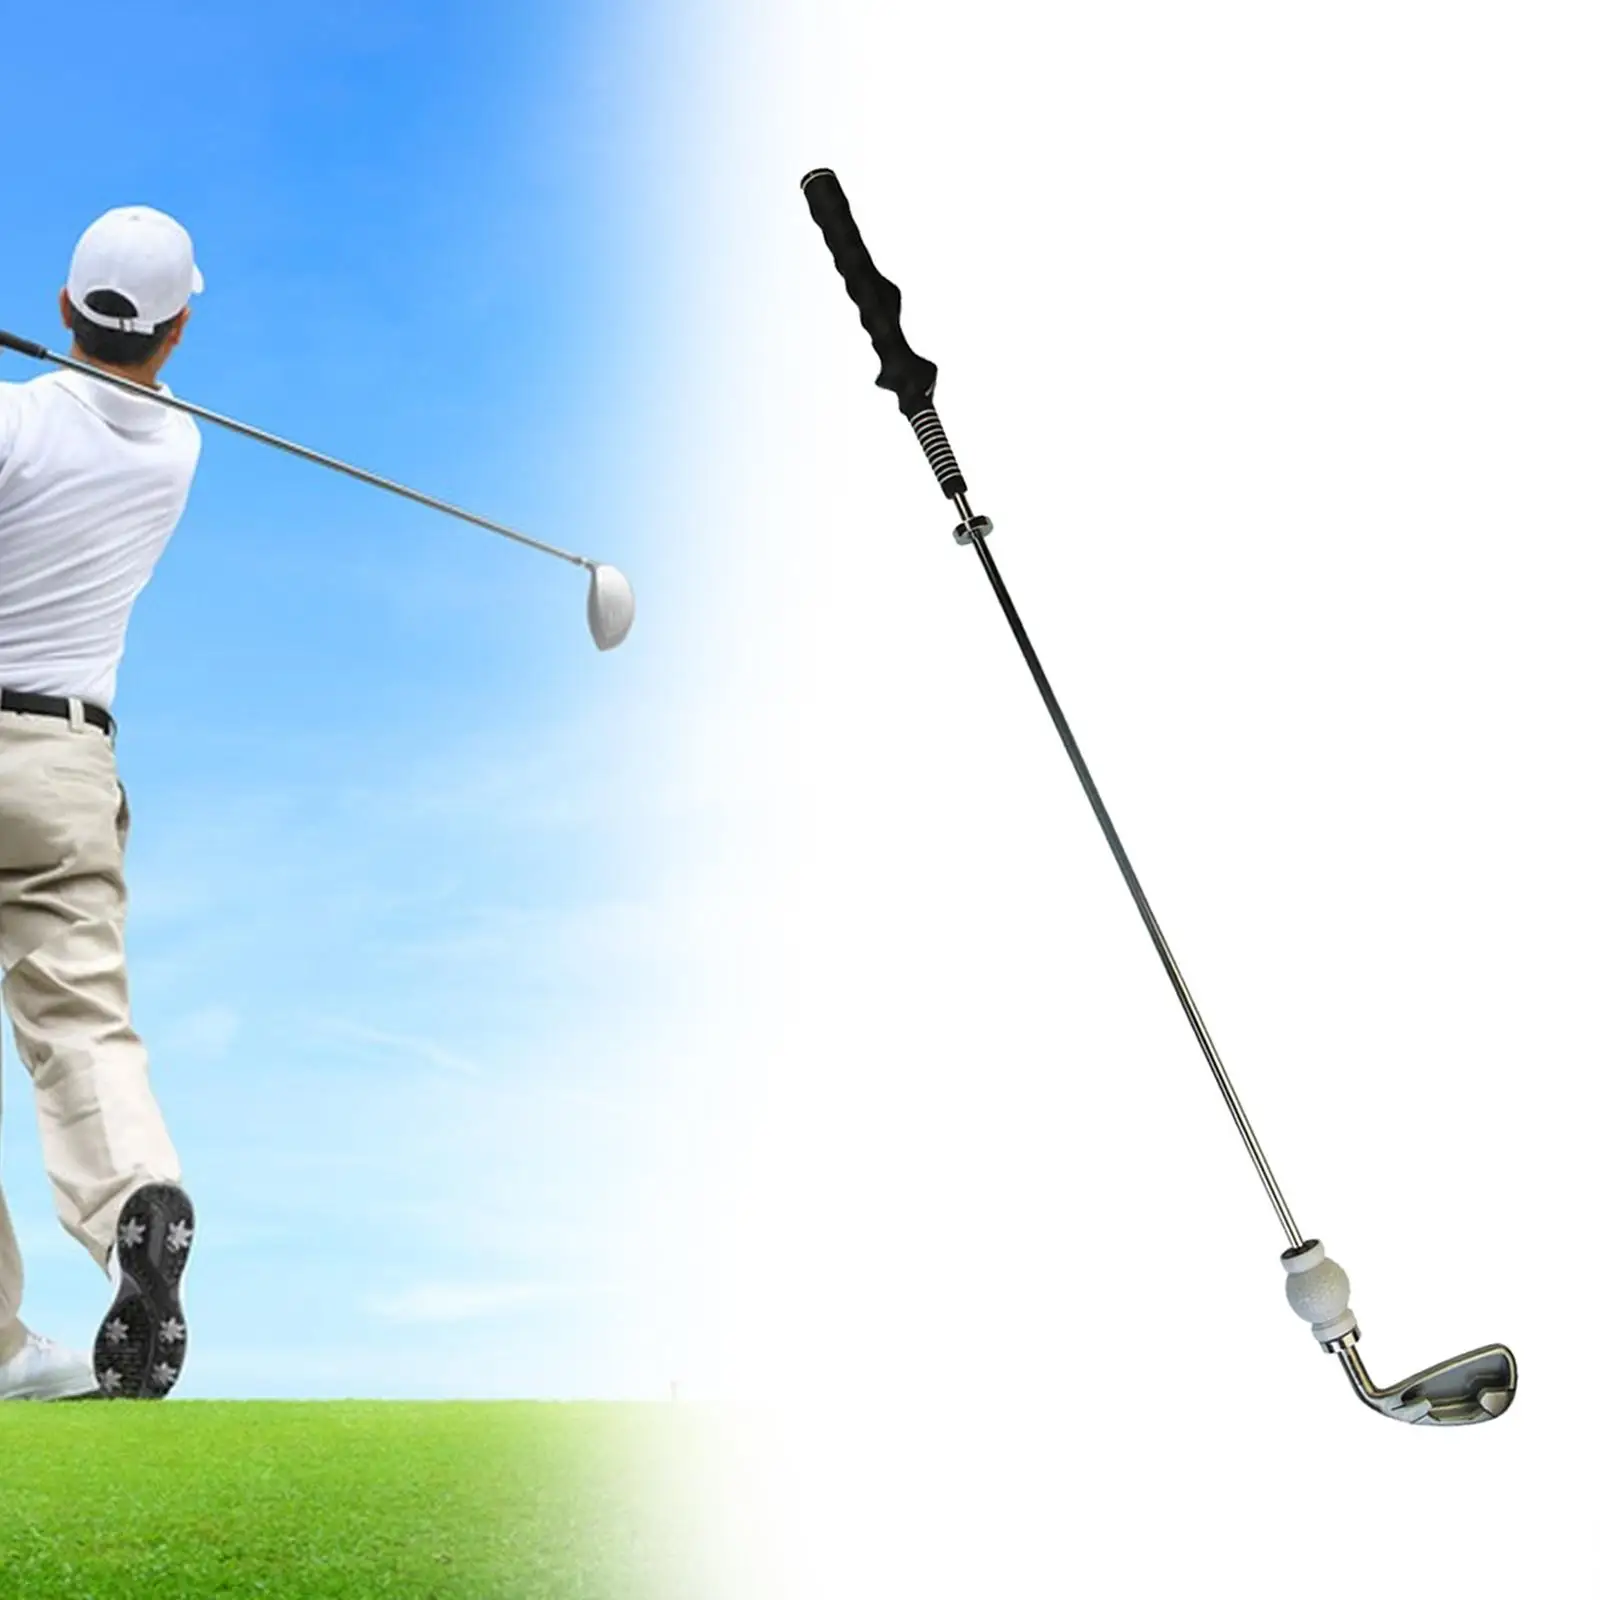 

Golf Magnetic Swing Trainer Outdoor Equipment Correct Posture Auxiliary Golf Practice Stick for Balance Rhythm Strength Speed